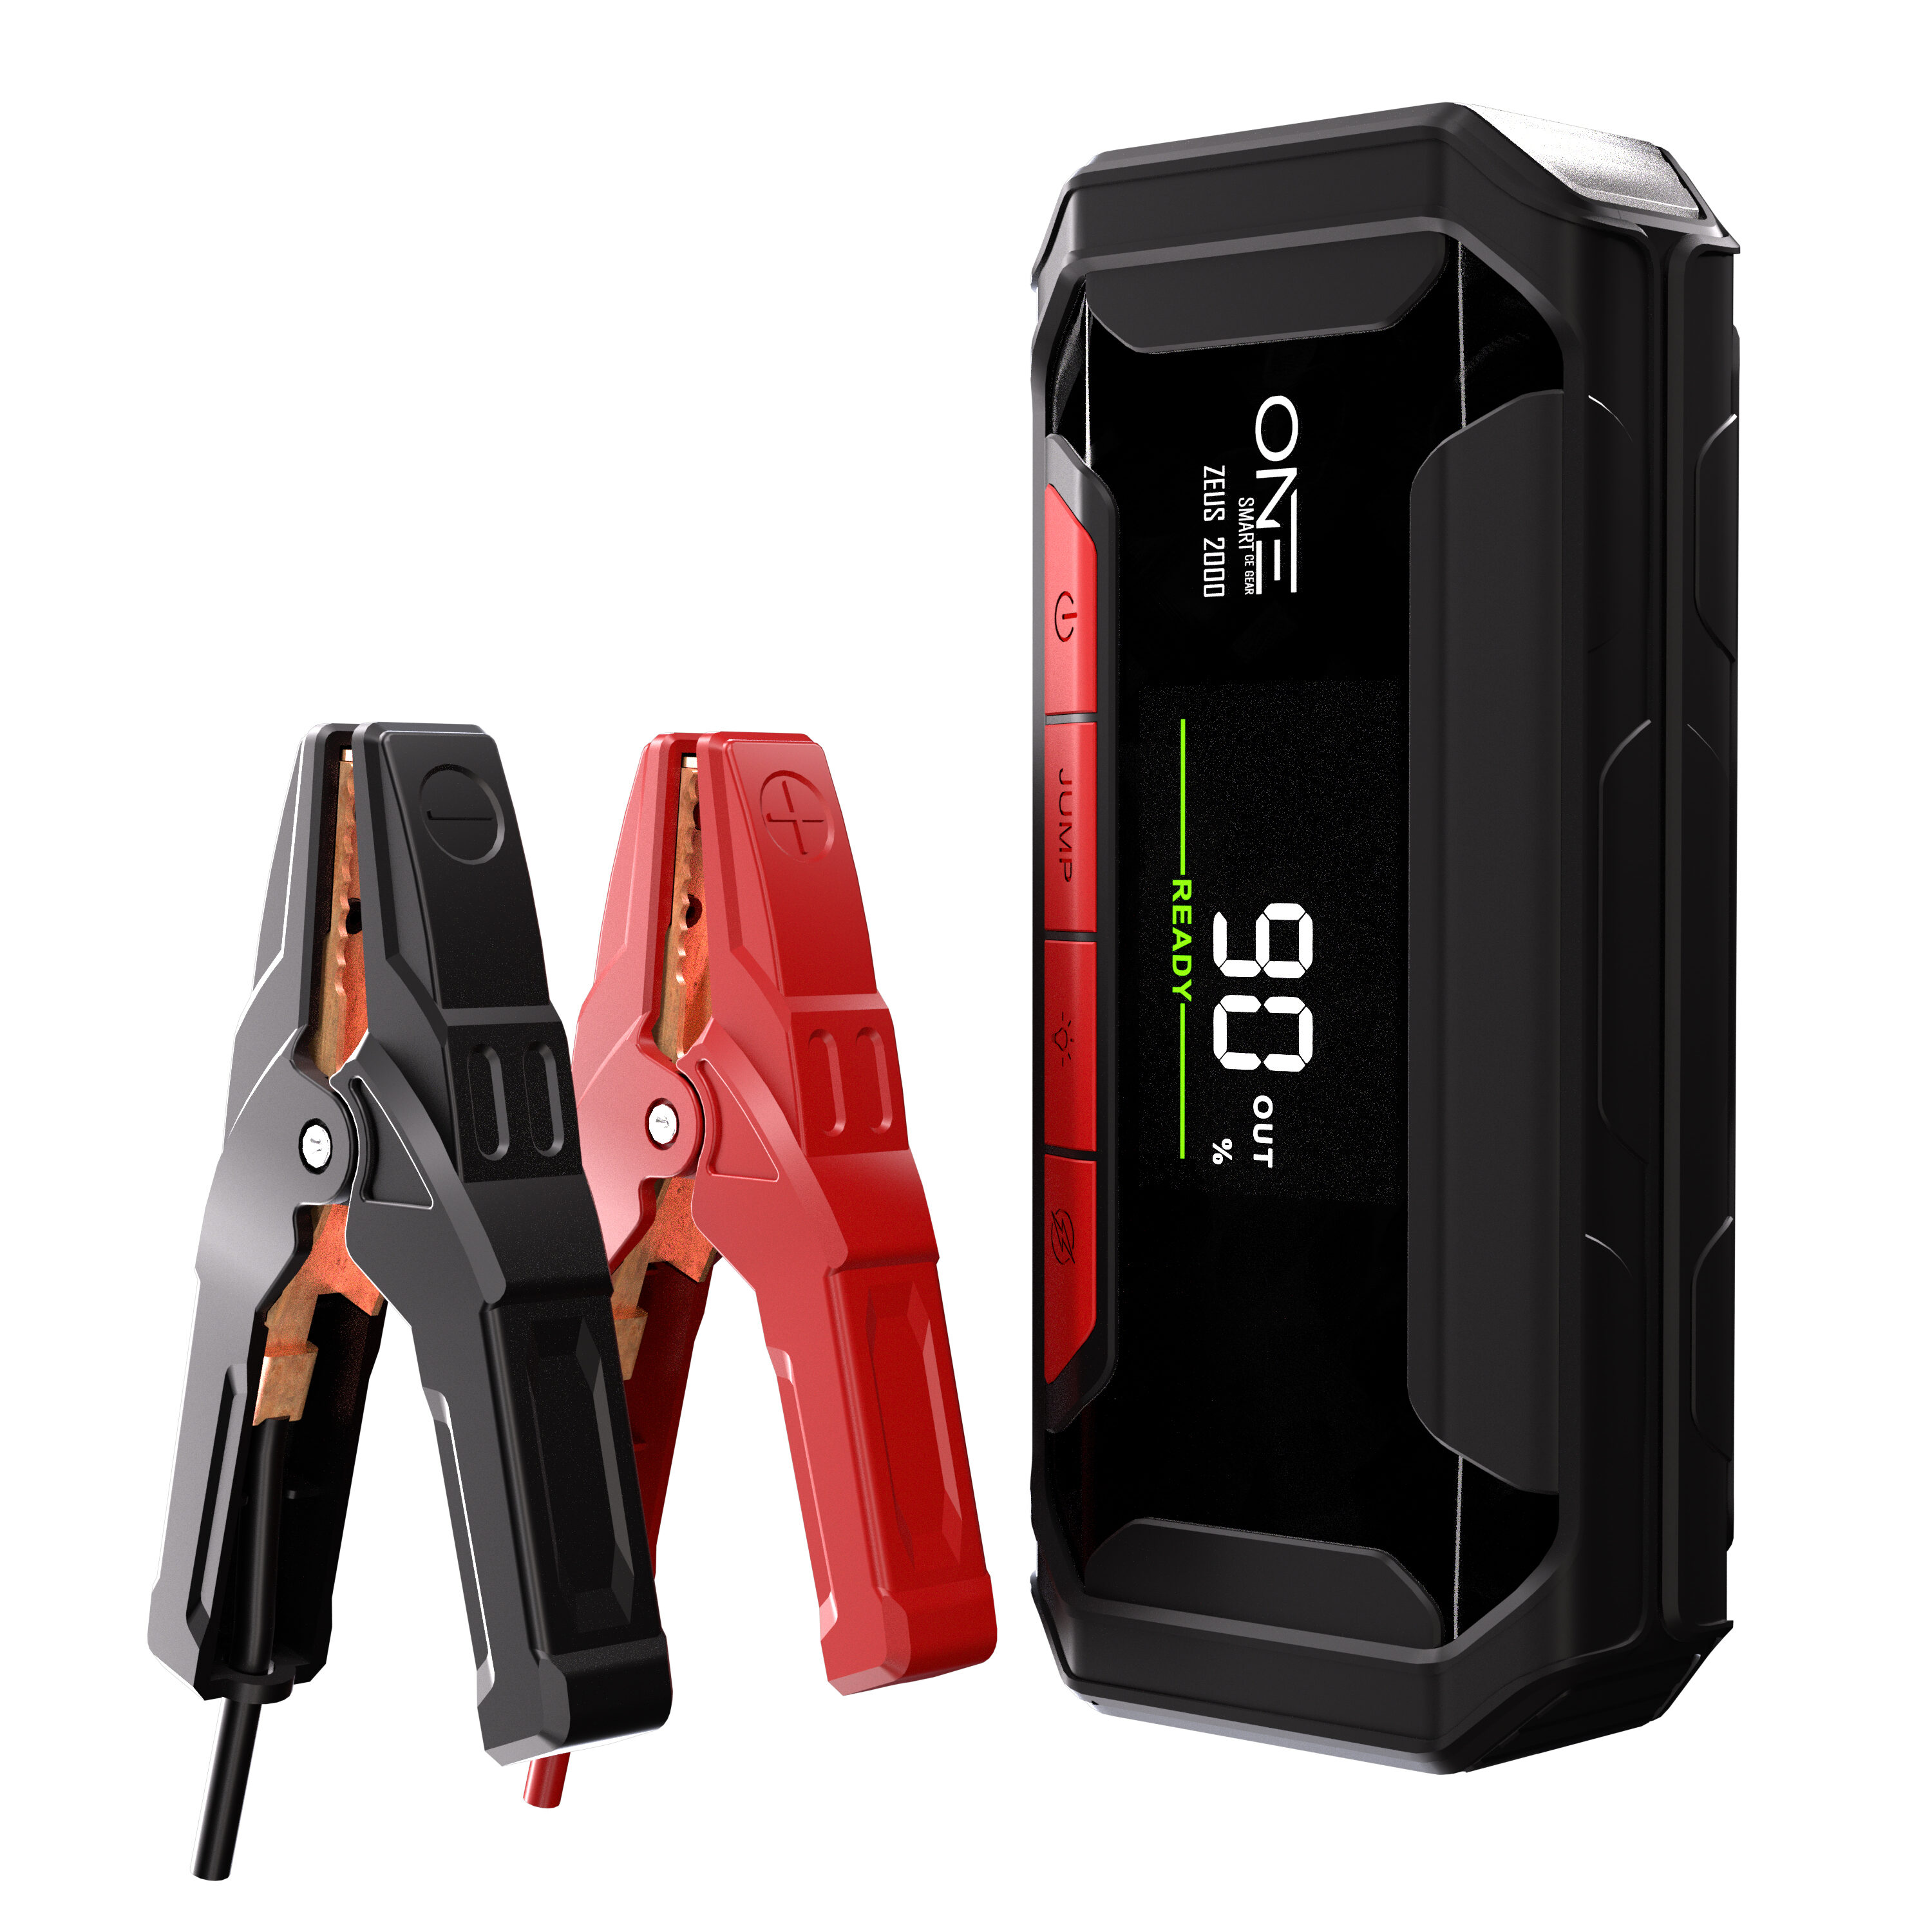 Duracell Bluetooth Enabled Lithium-Ion 1100A Portable Jump Starter with USB  Power Bank and Flashlight Black DRLJS110B - Best Buy